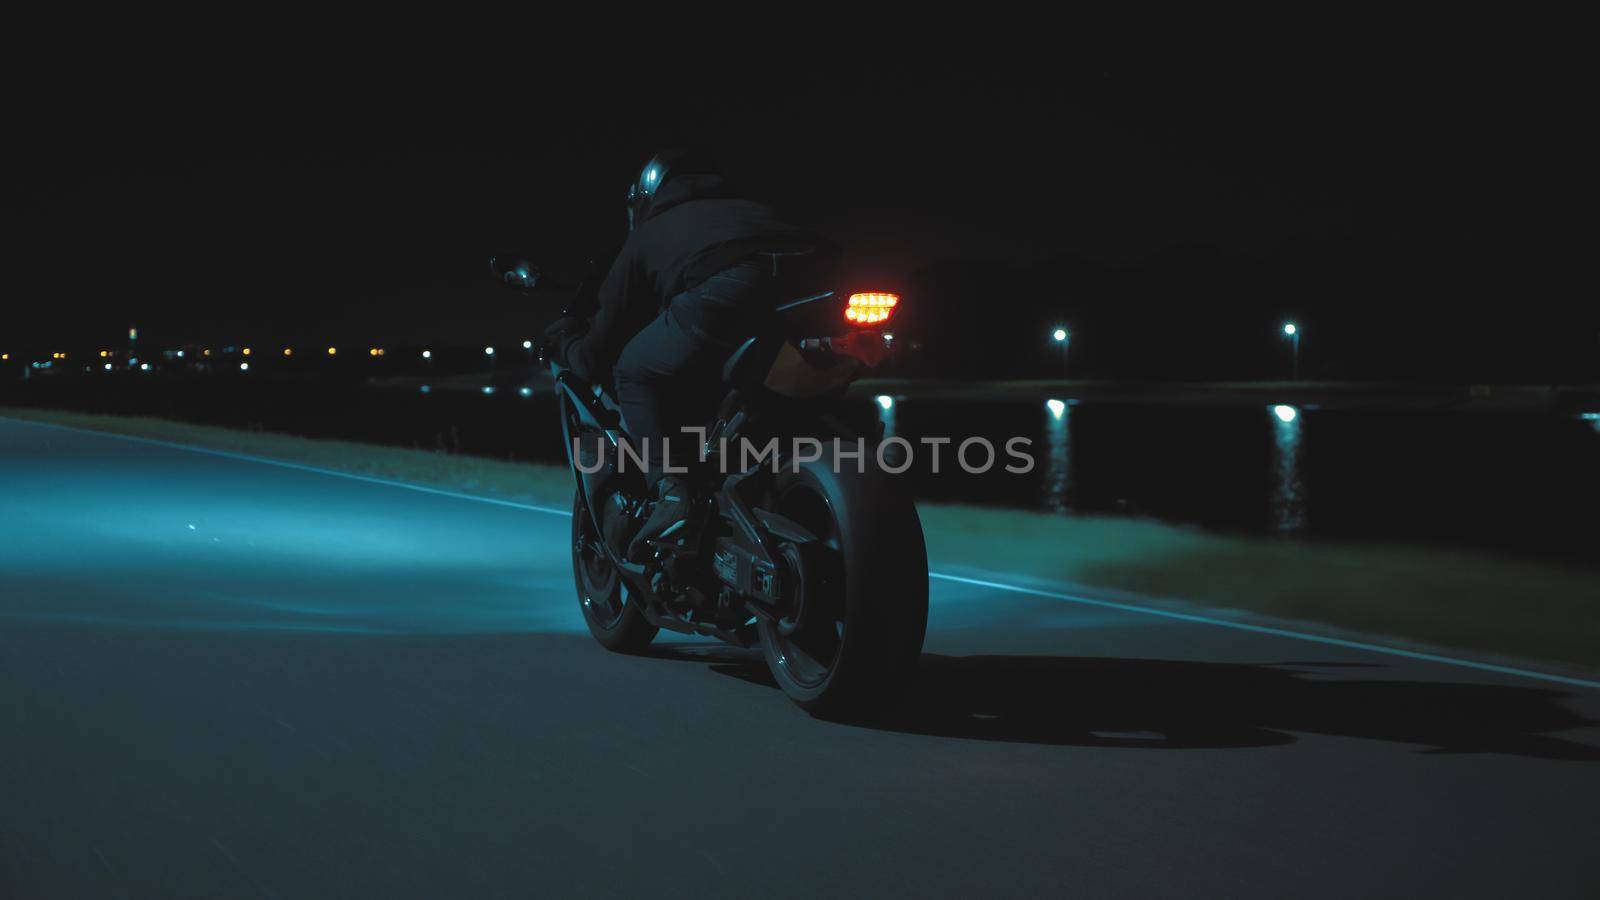 A man rides a sports motorcycle through the city at night against the backdrop of the river in 4k